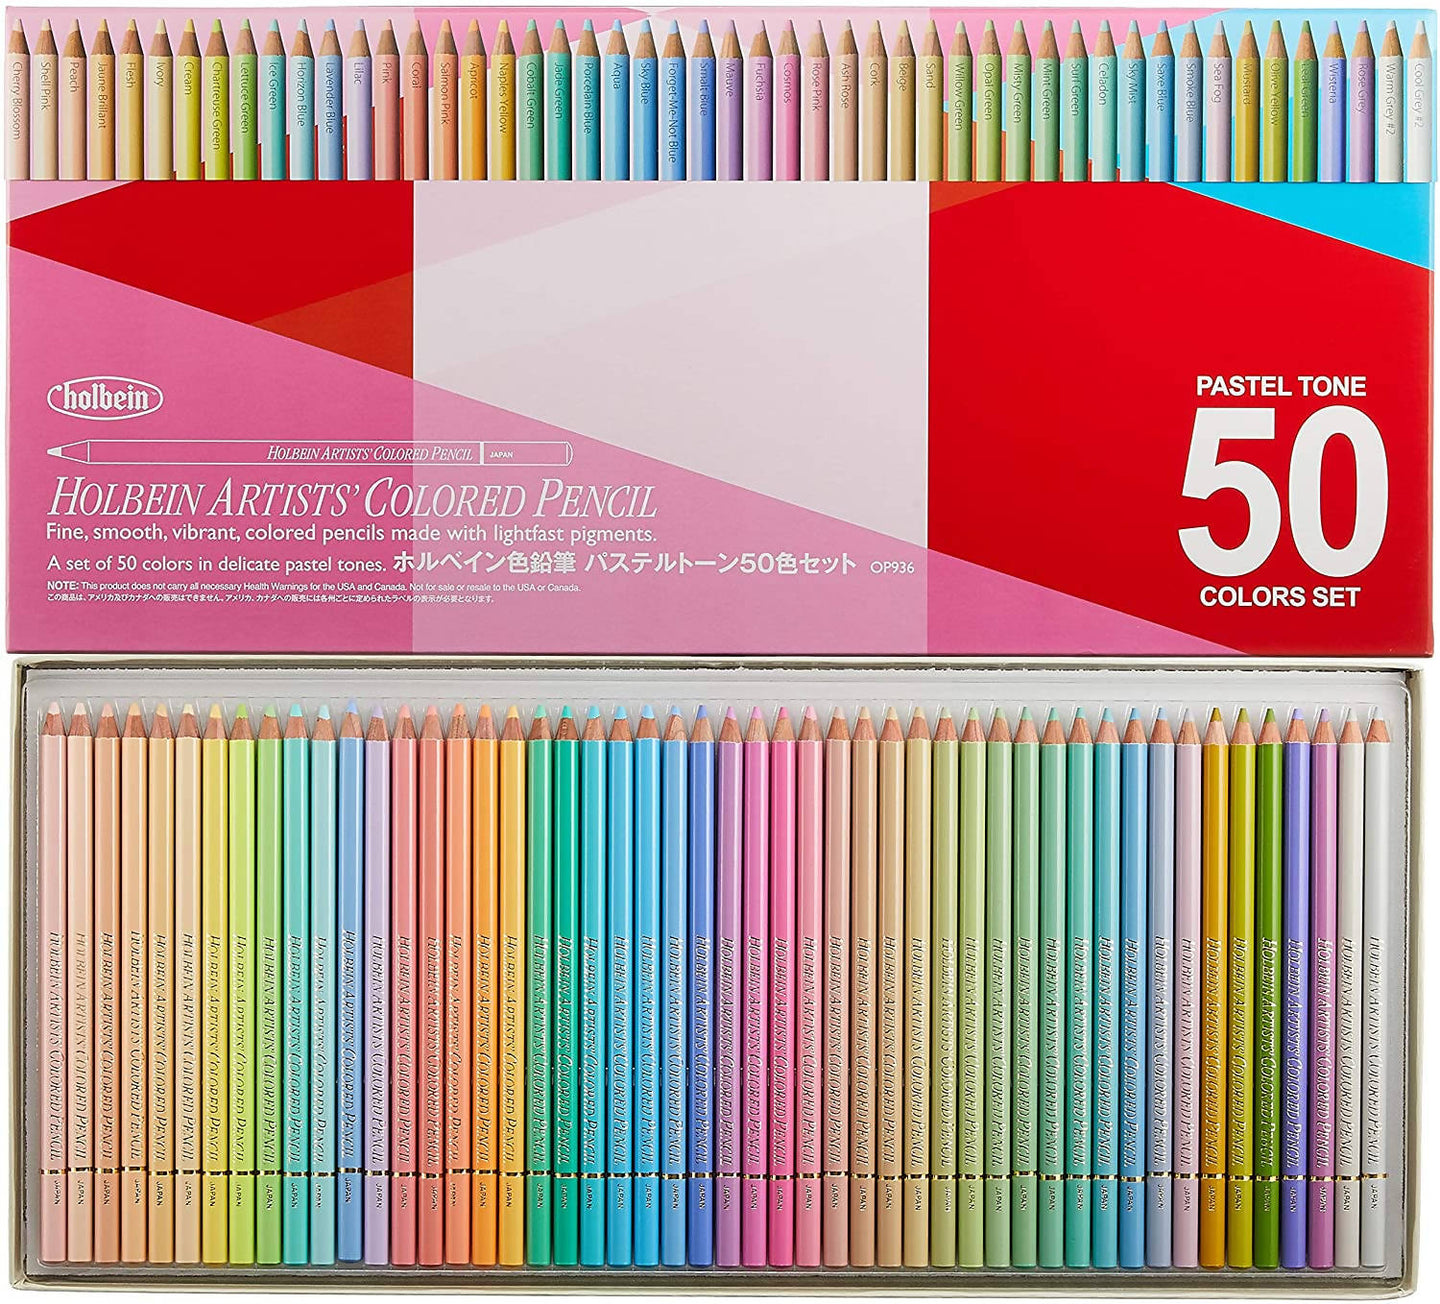 Holbein Artists Colored Pencils Set of 12, Pastel